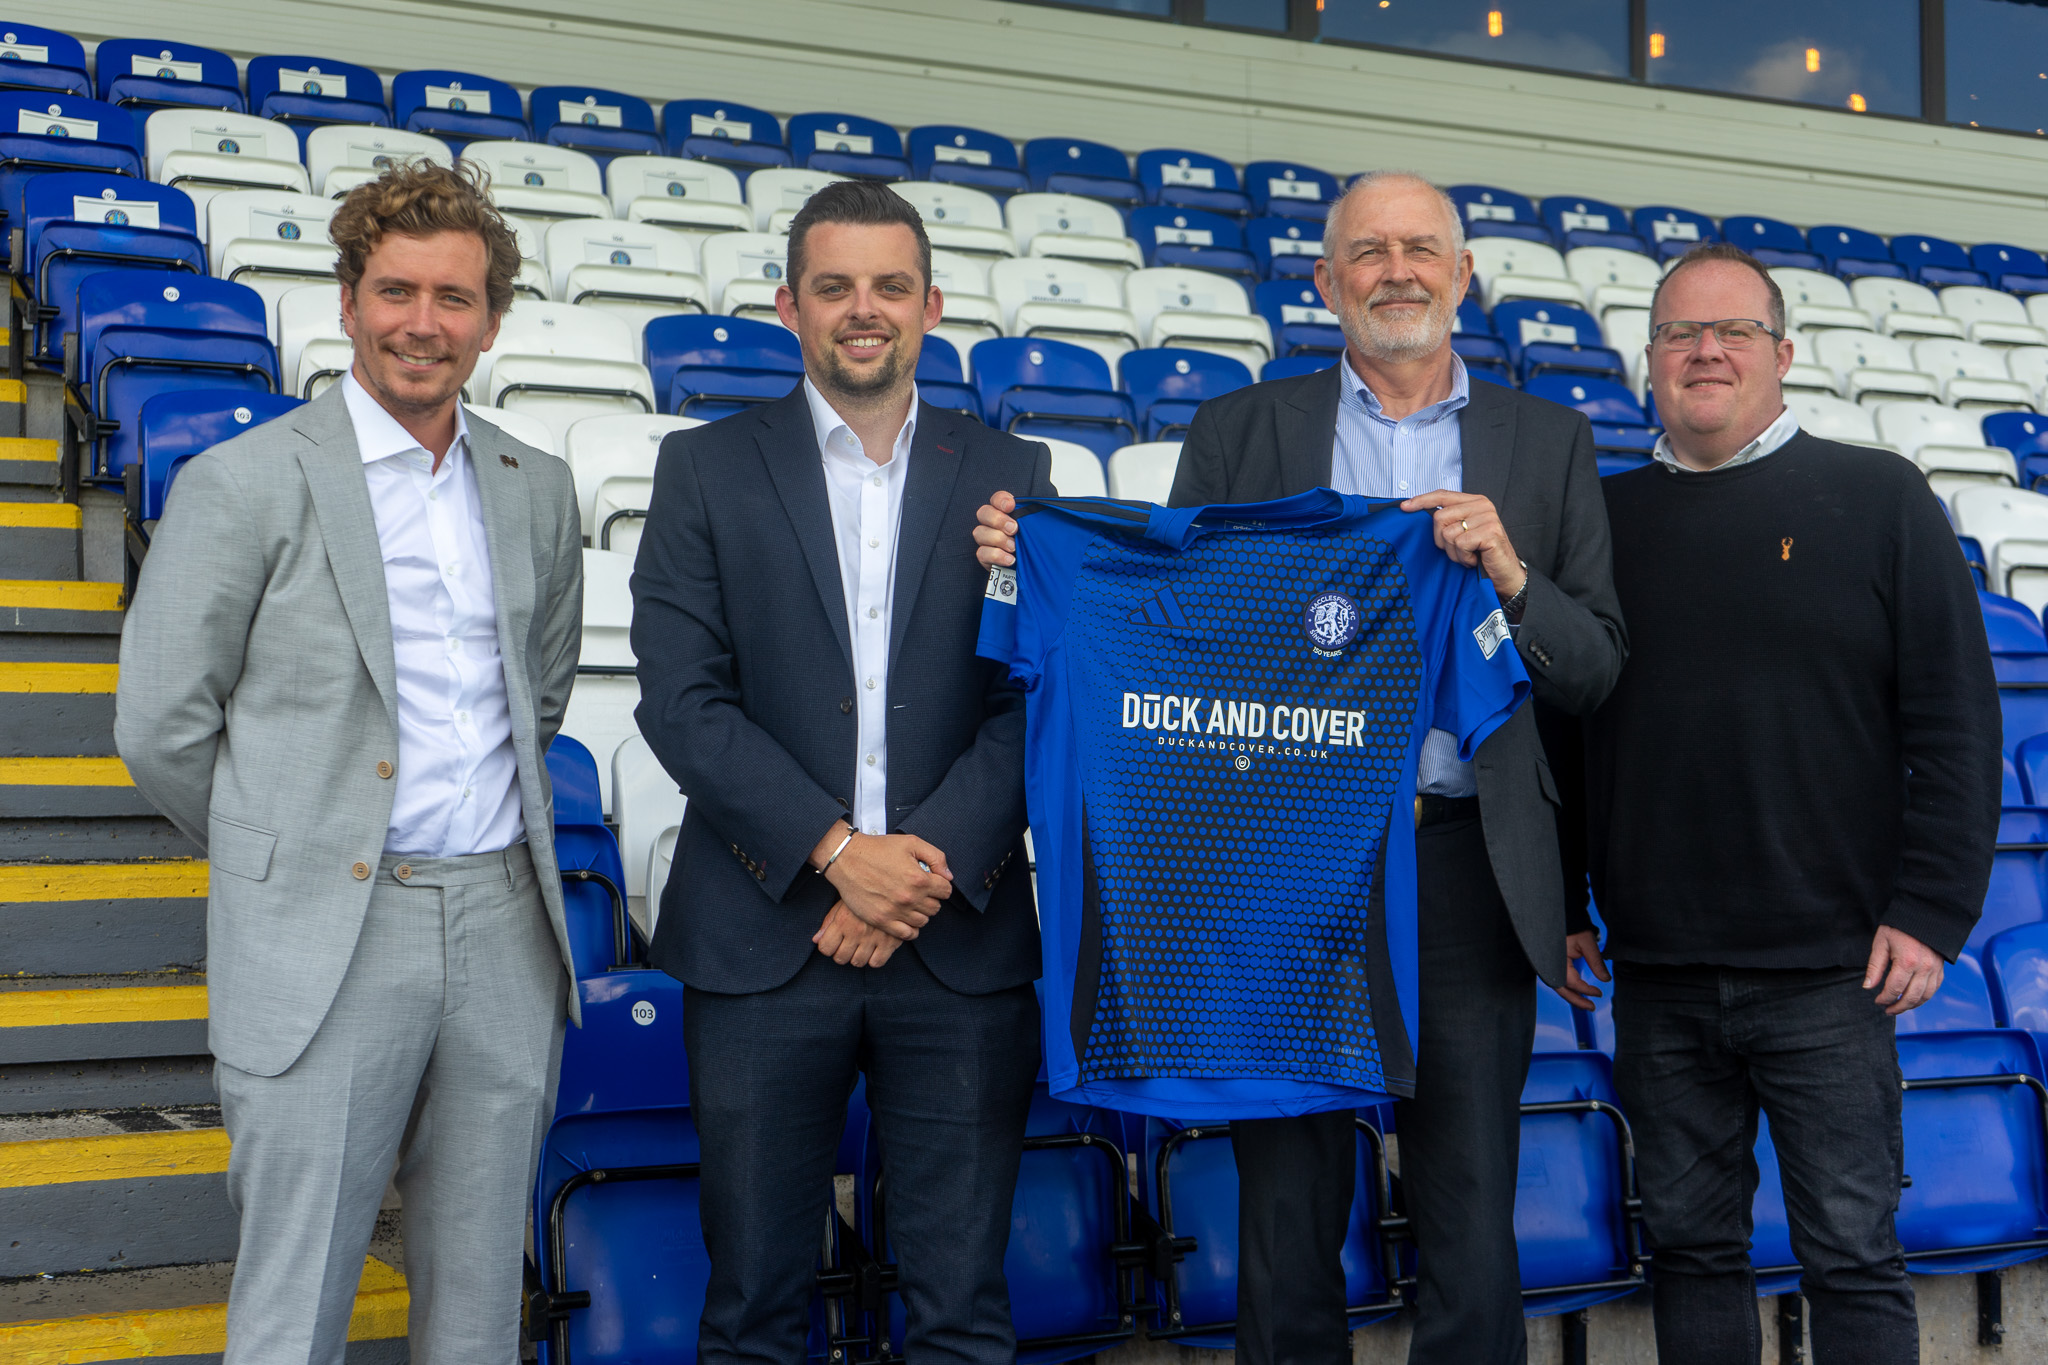 JORDAN AND HALSTEAD BECOME OFFICIAL SEAT SPONSOR IN LUCRATIVE LONG-TERM DEAL